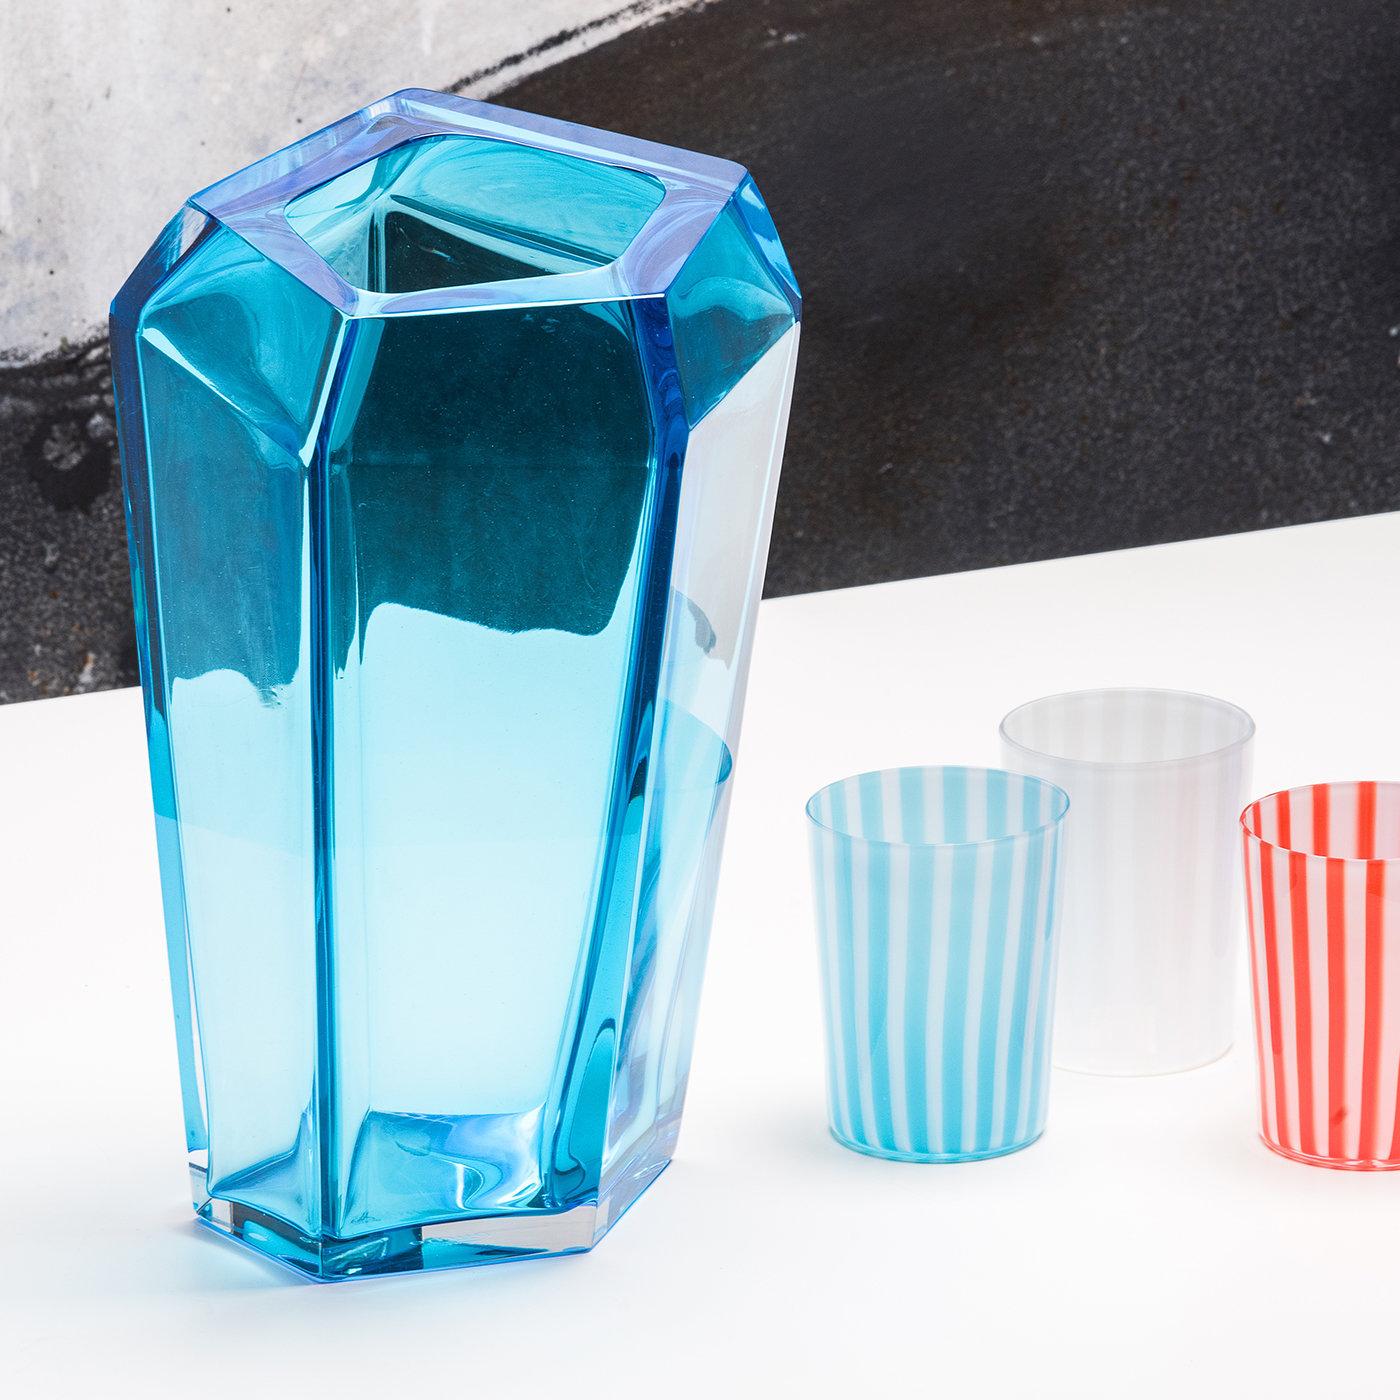 This elegant and modern vase was crafted of mouth-blown Murano glass and designed by Karim Rashid as part of a series of pieces that mix a contemporary sensibility with the exquisite craftsmanship of hand-blowing Murano glass. Tinted with a vivid